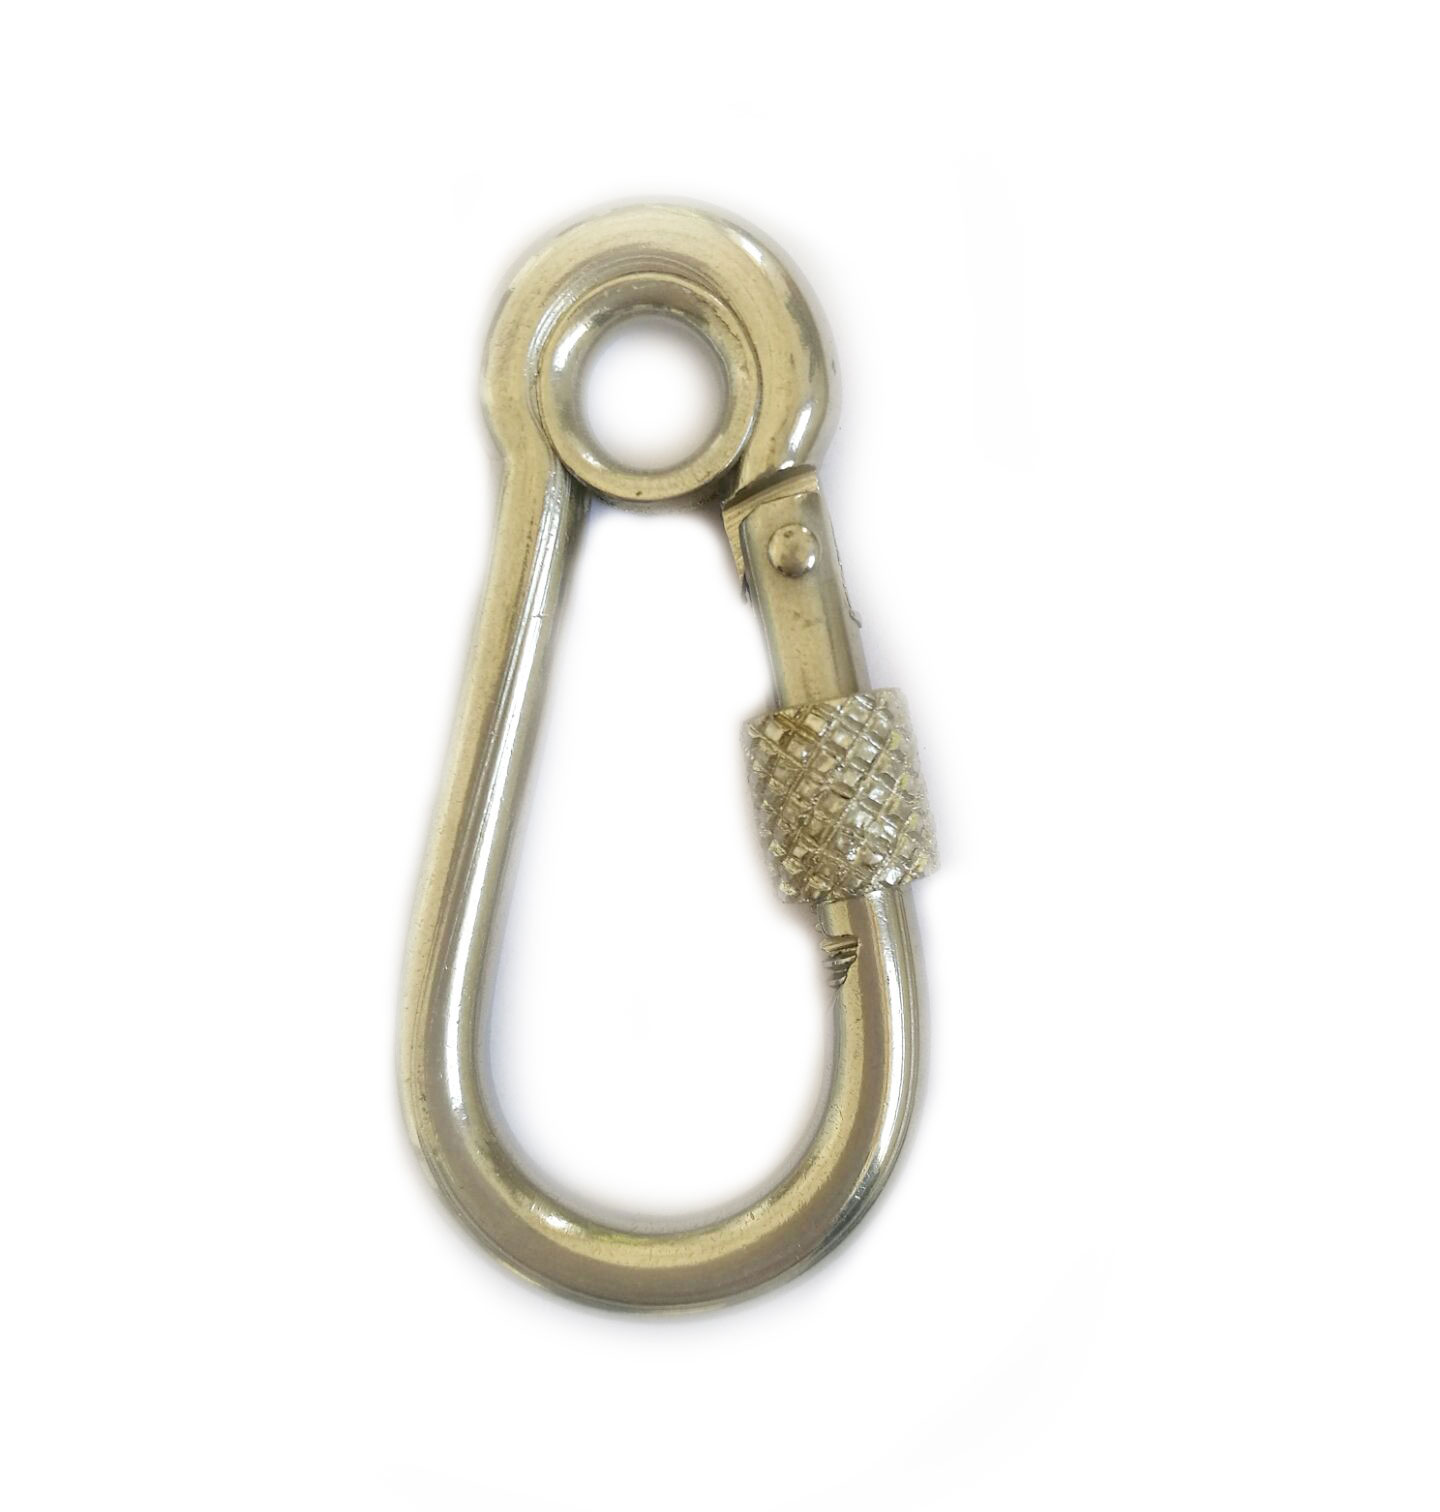 Snap hook with screw